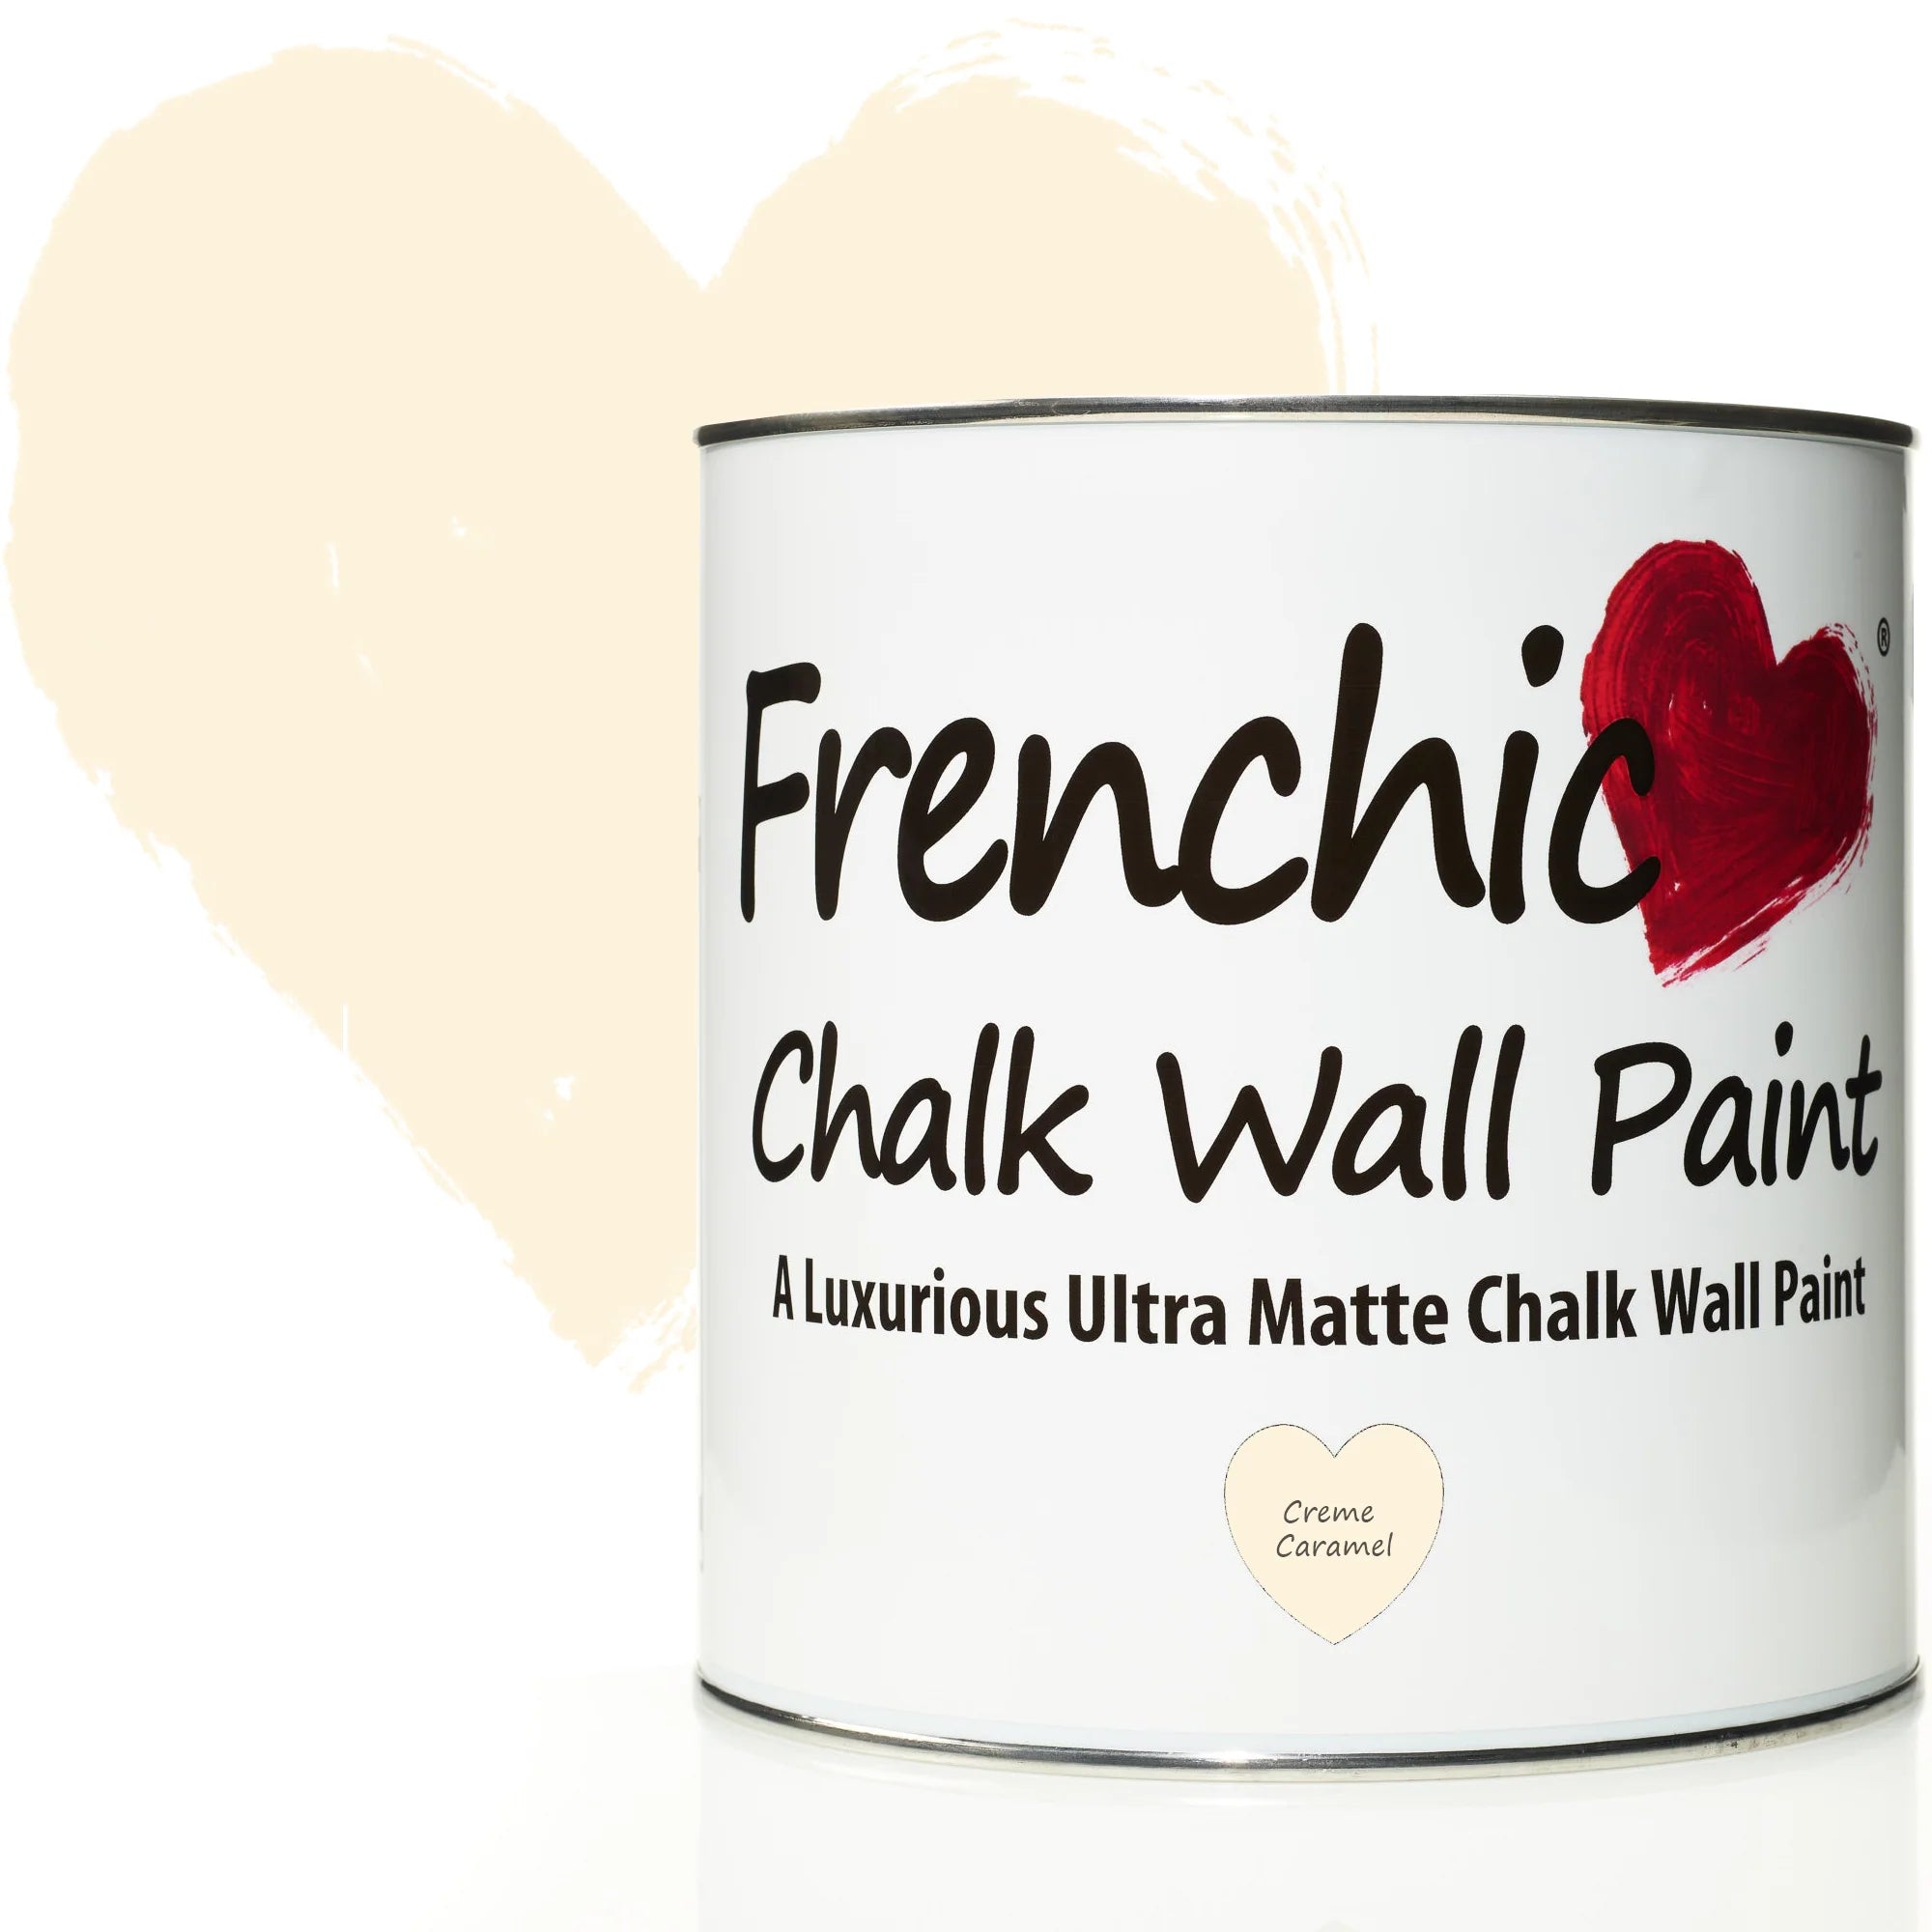 Frenchic Paint | Crème Caramel Wall Paint by Weirs of Baggot Street